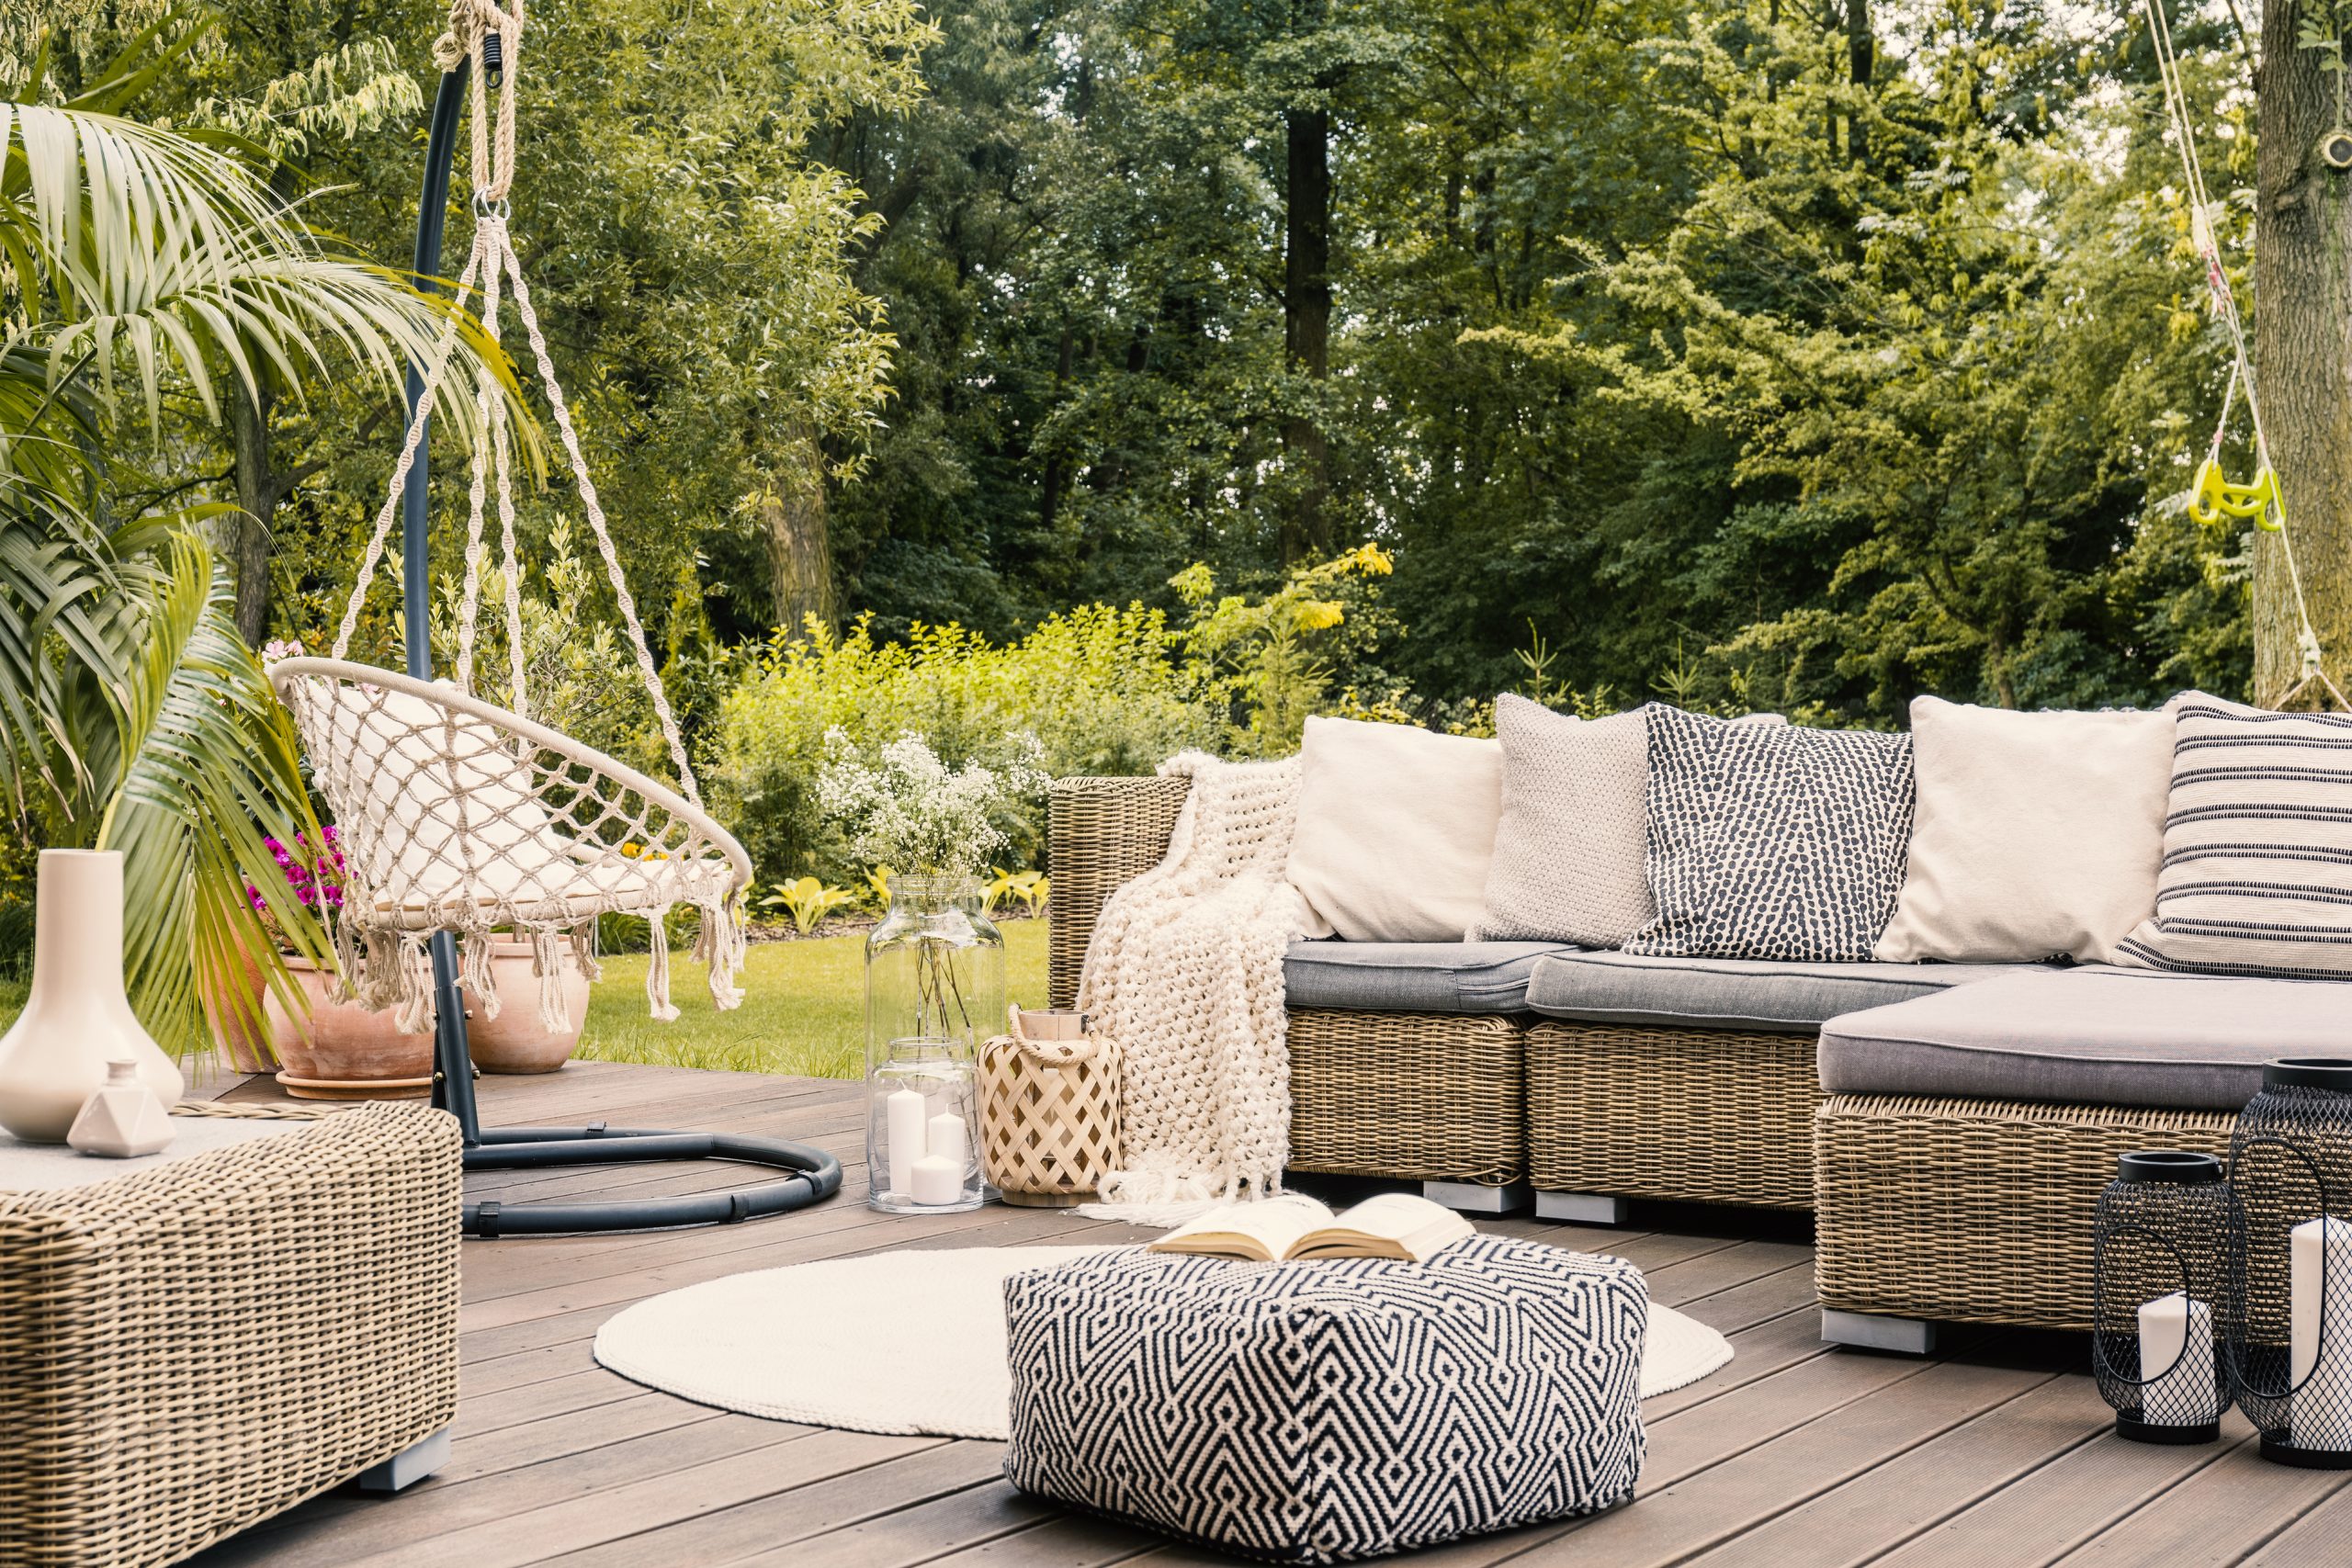 Getting Your Garden Ready for Summer with Composite Decking